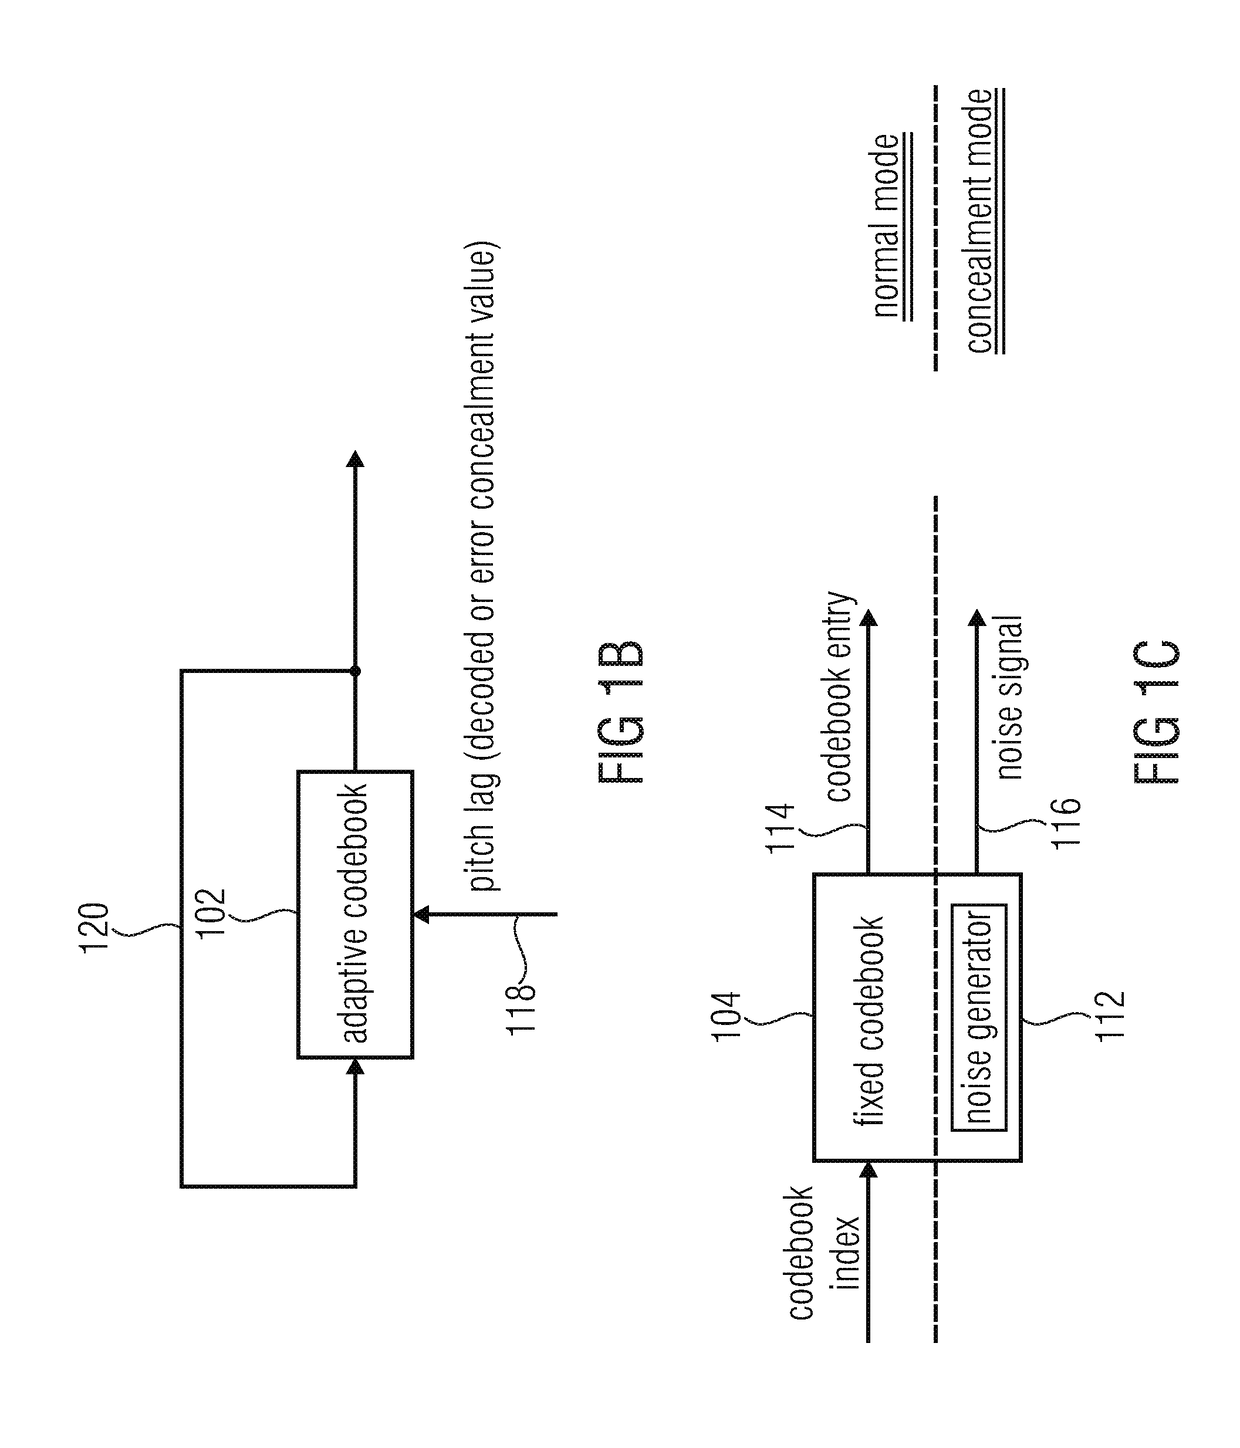 Apparatus and method for generating an error concealment signal using individual replacement LPC representations for individual codebook information